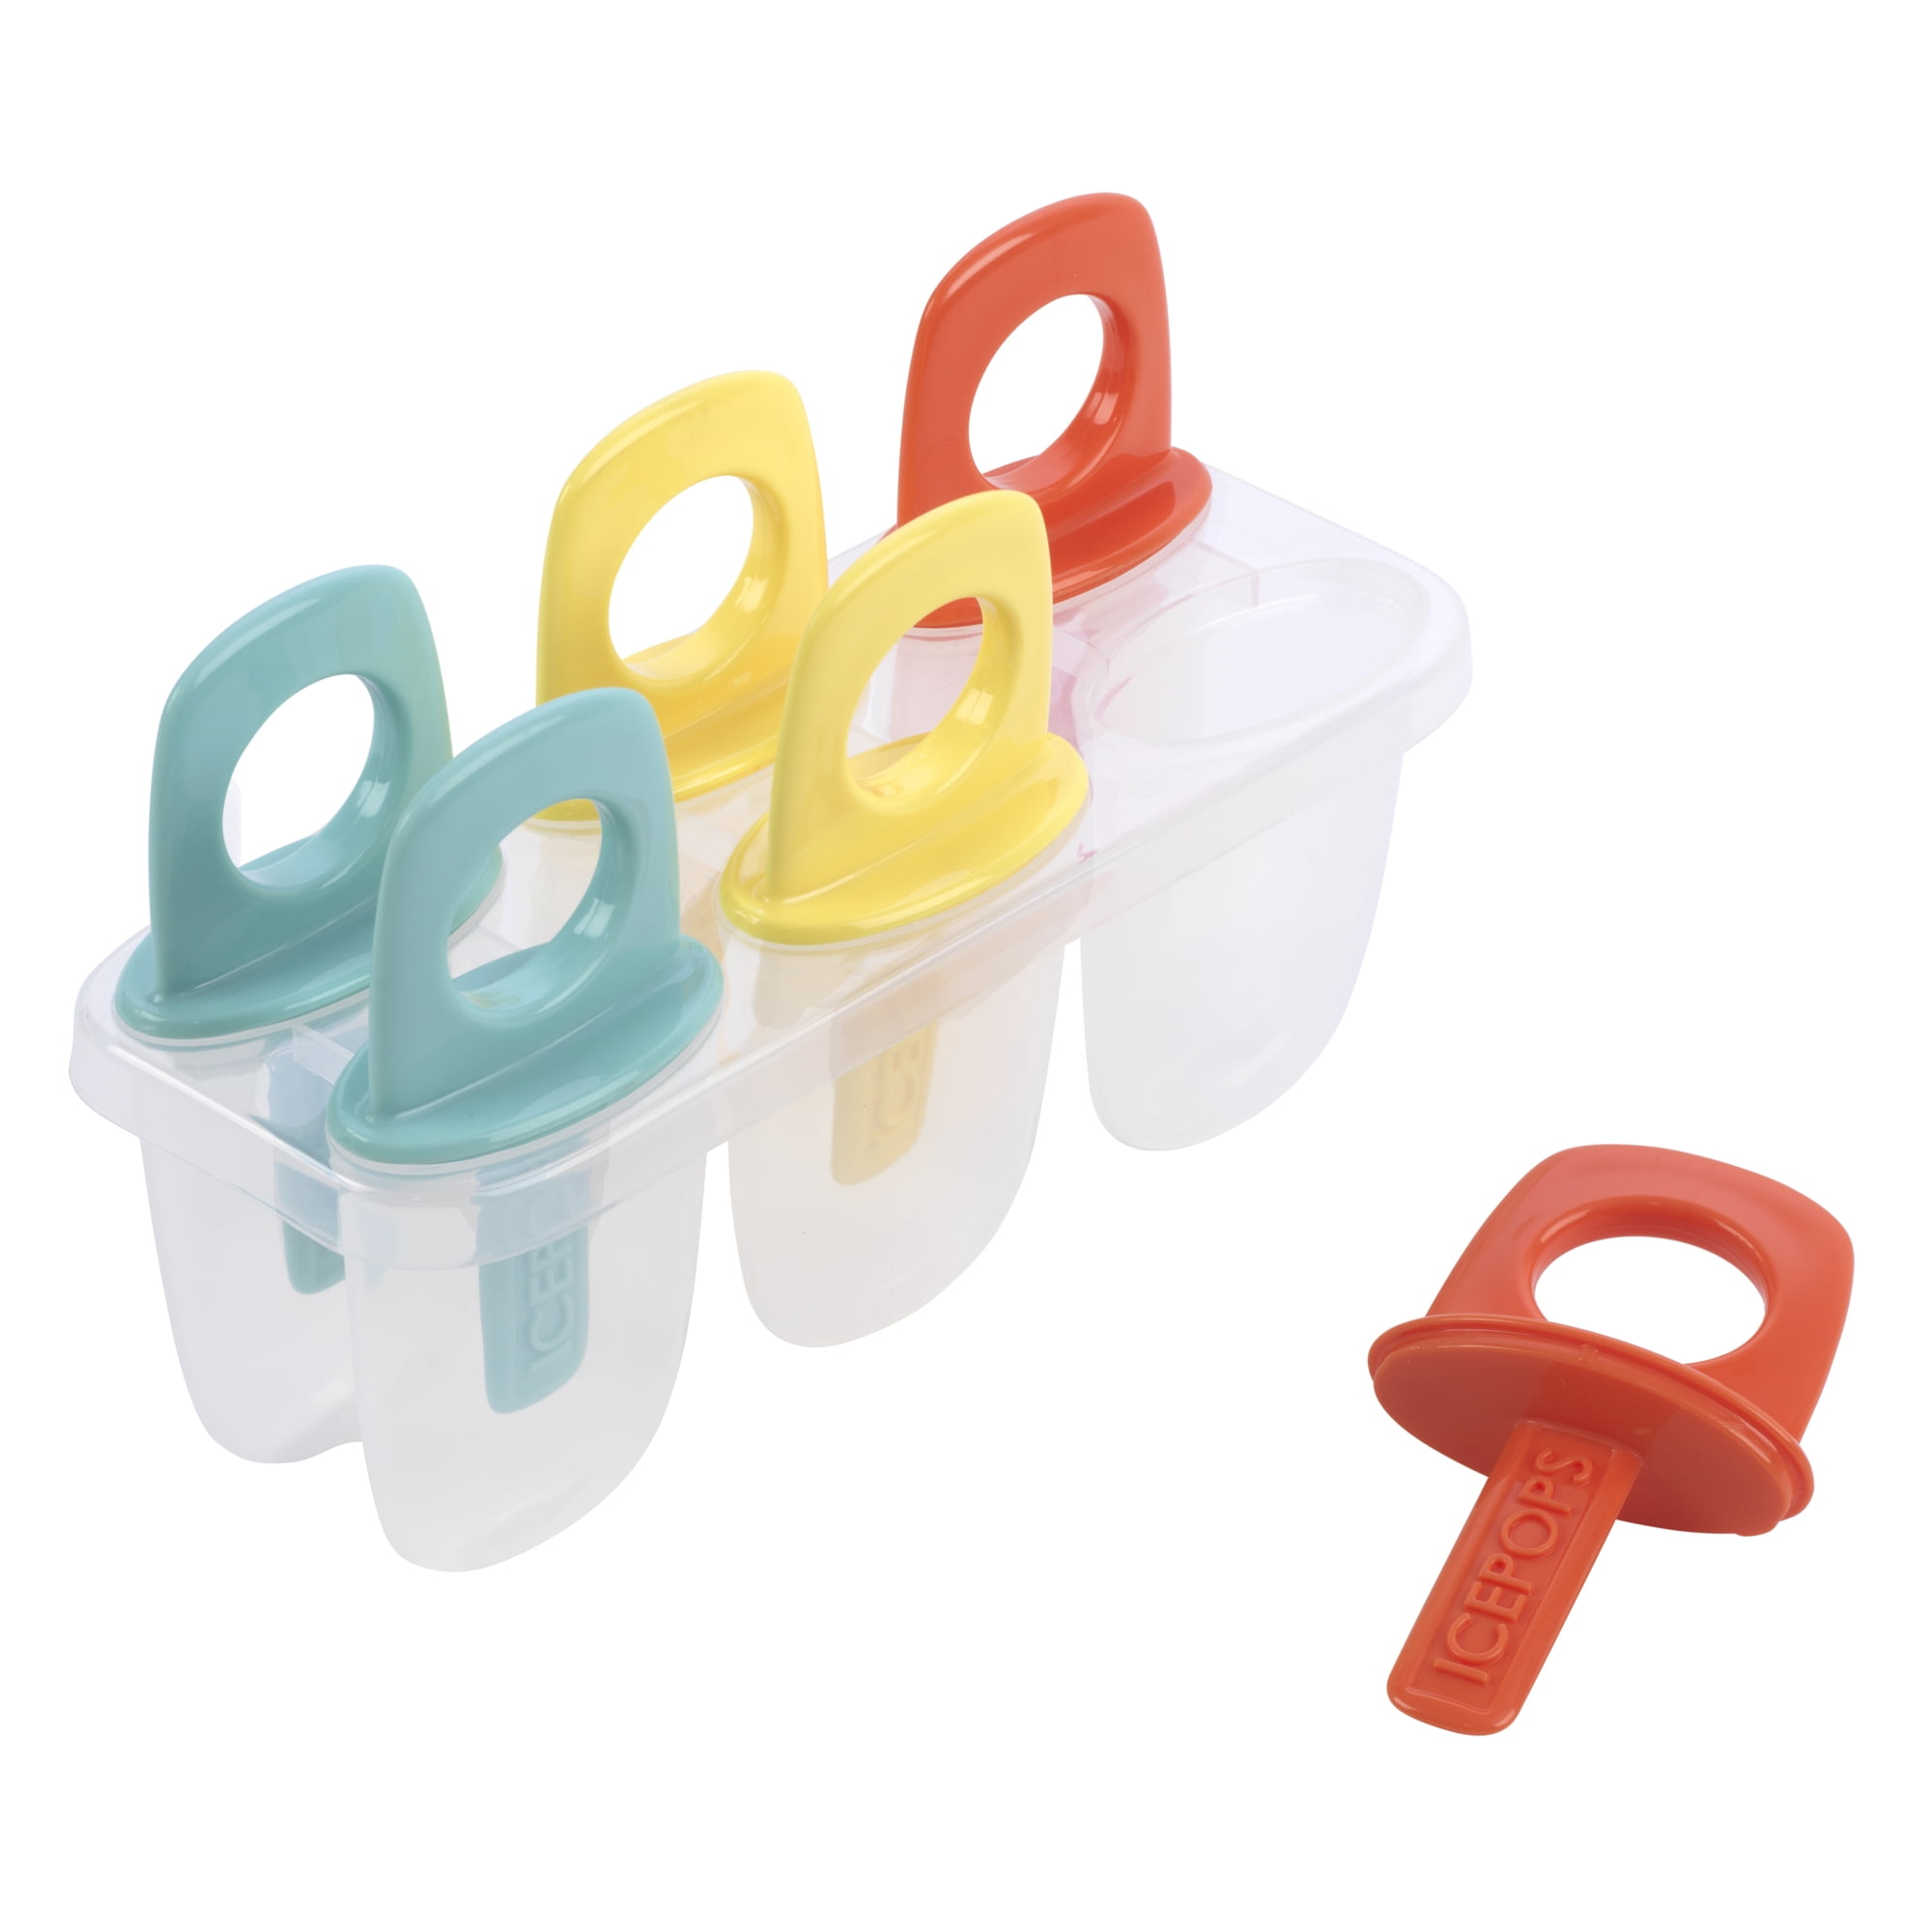 GoodCook ProFreshionals Ice Pop Maker, Makes 6 Ice Pops, Assorted Colors 